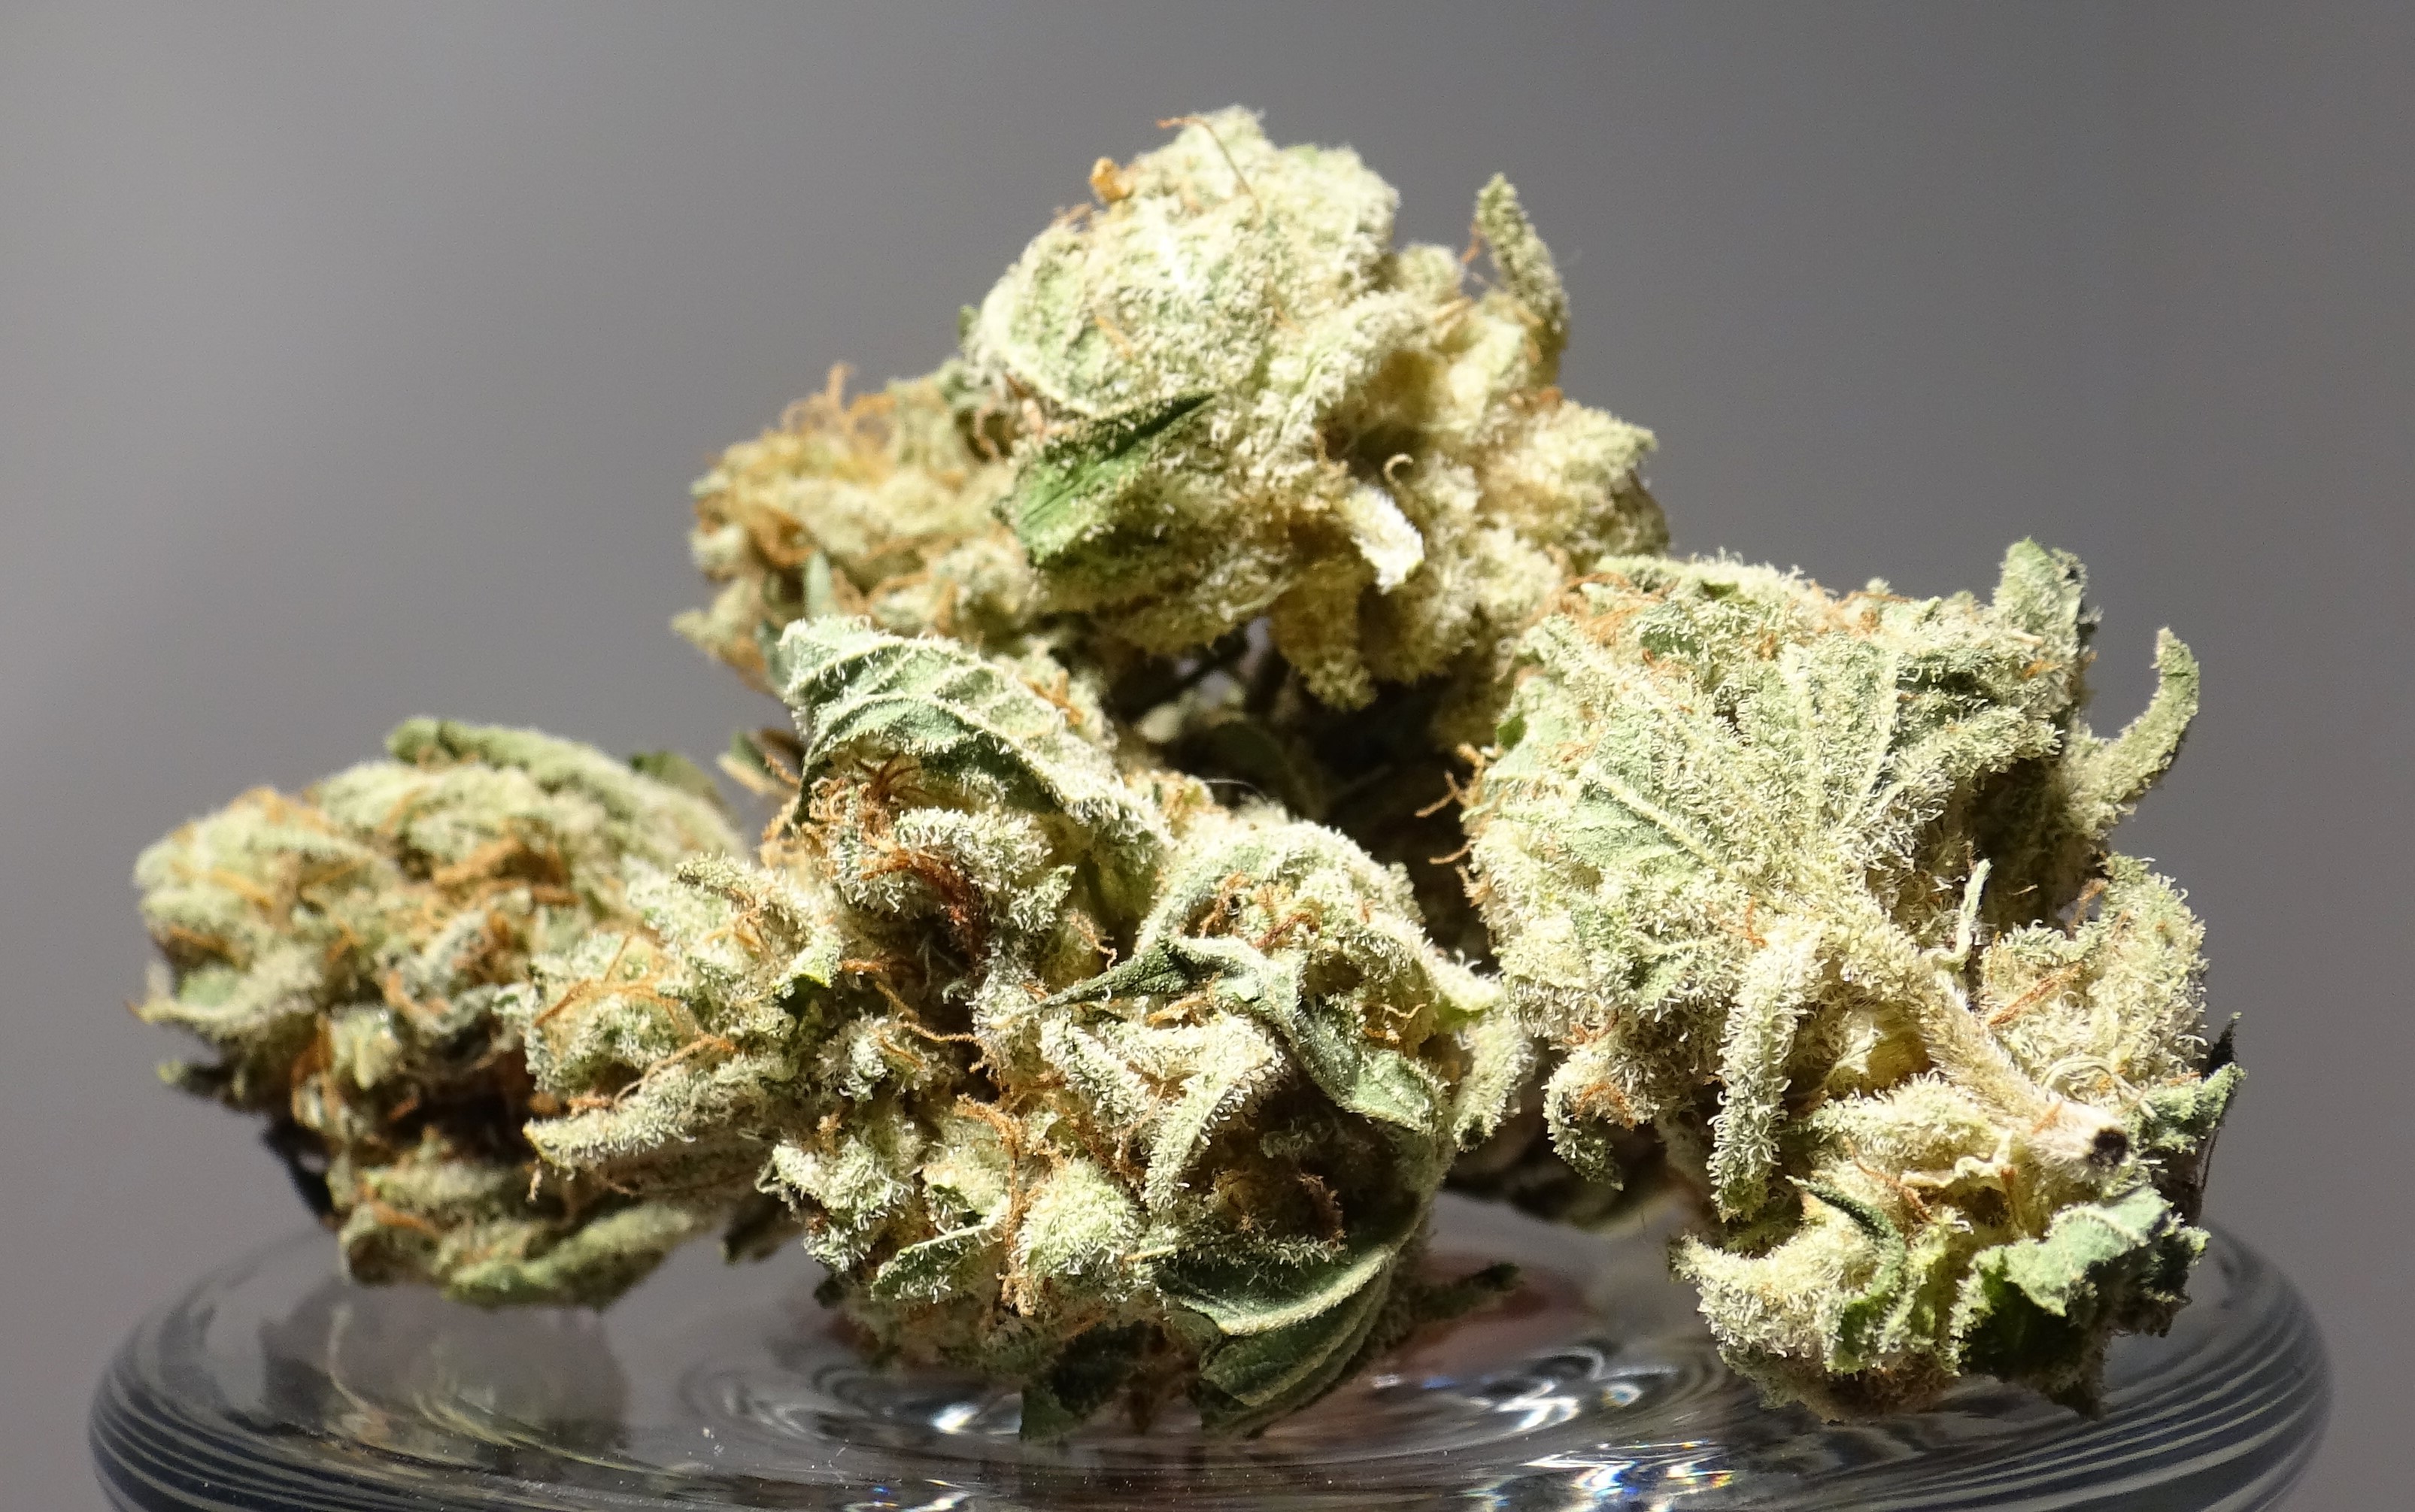 How the whole process of ordering marijuana from online dispensaries works?